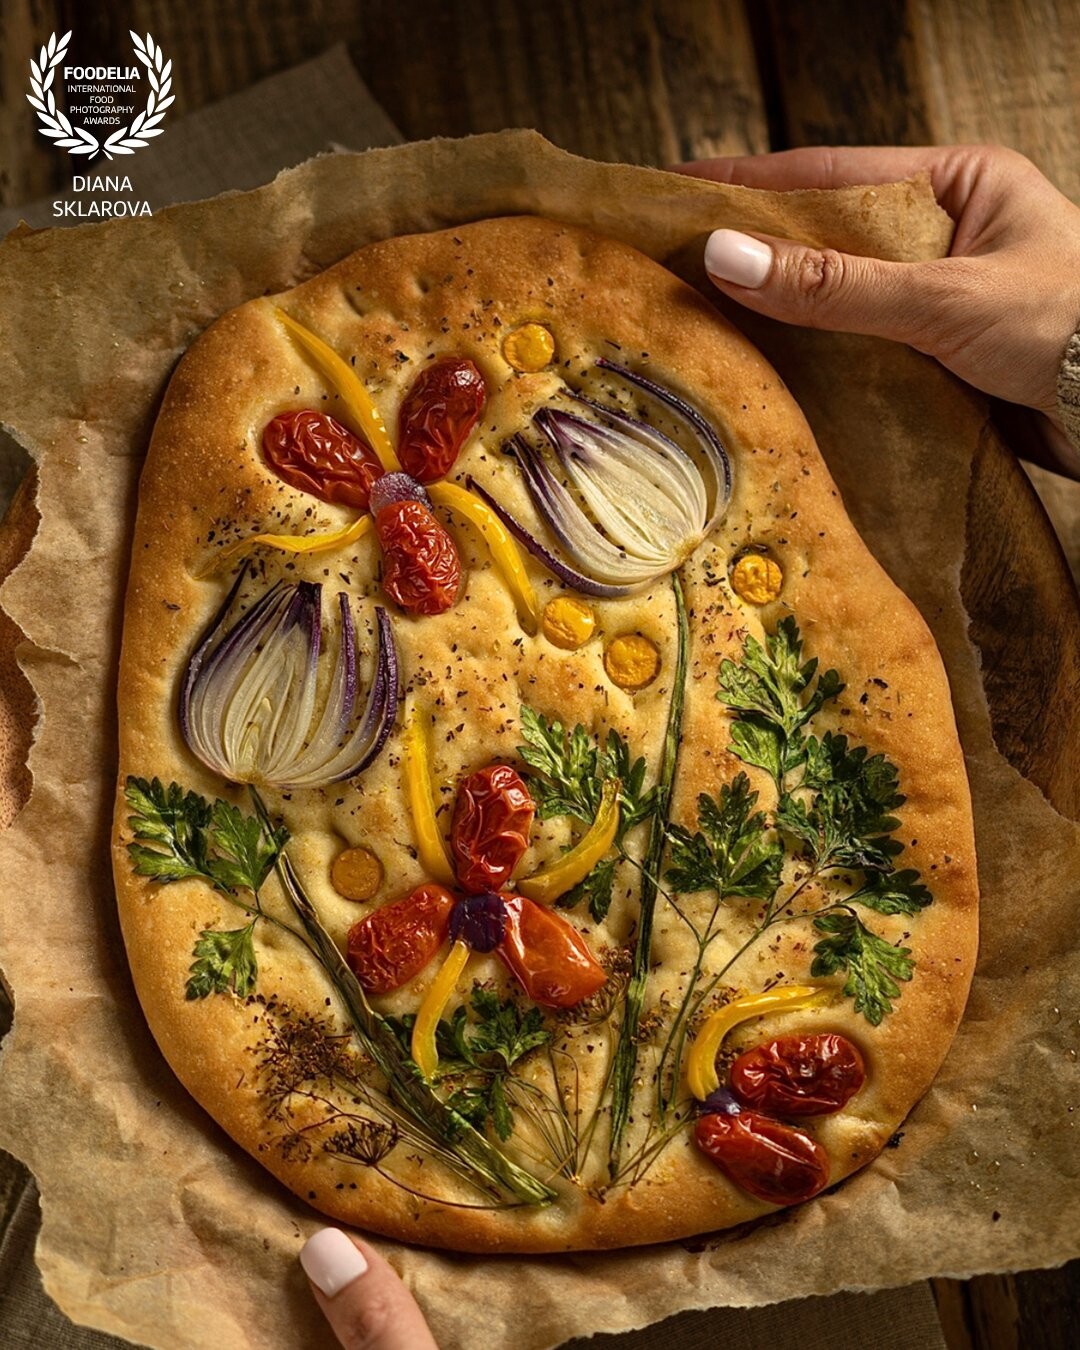 Garden art focaccia bread with vegetables, greens, herbs - beautiful flower composition on homemade freshly baked bread on wooden background.